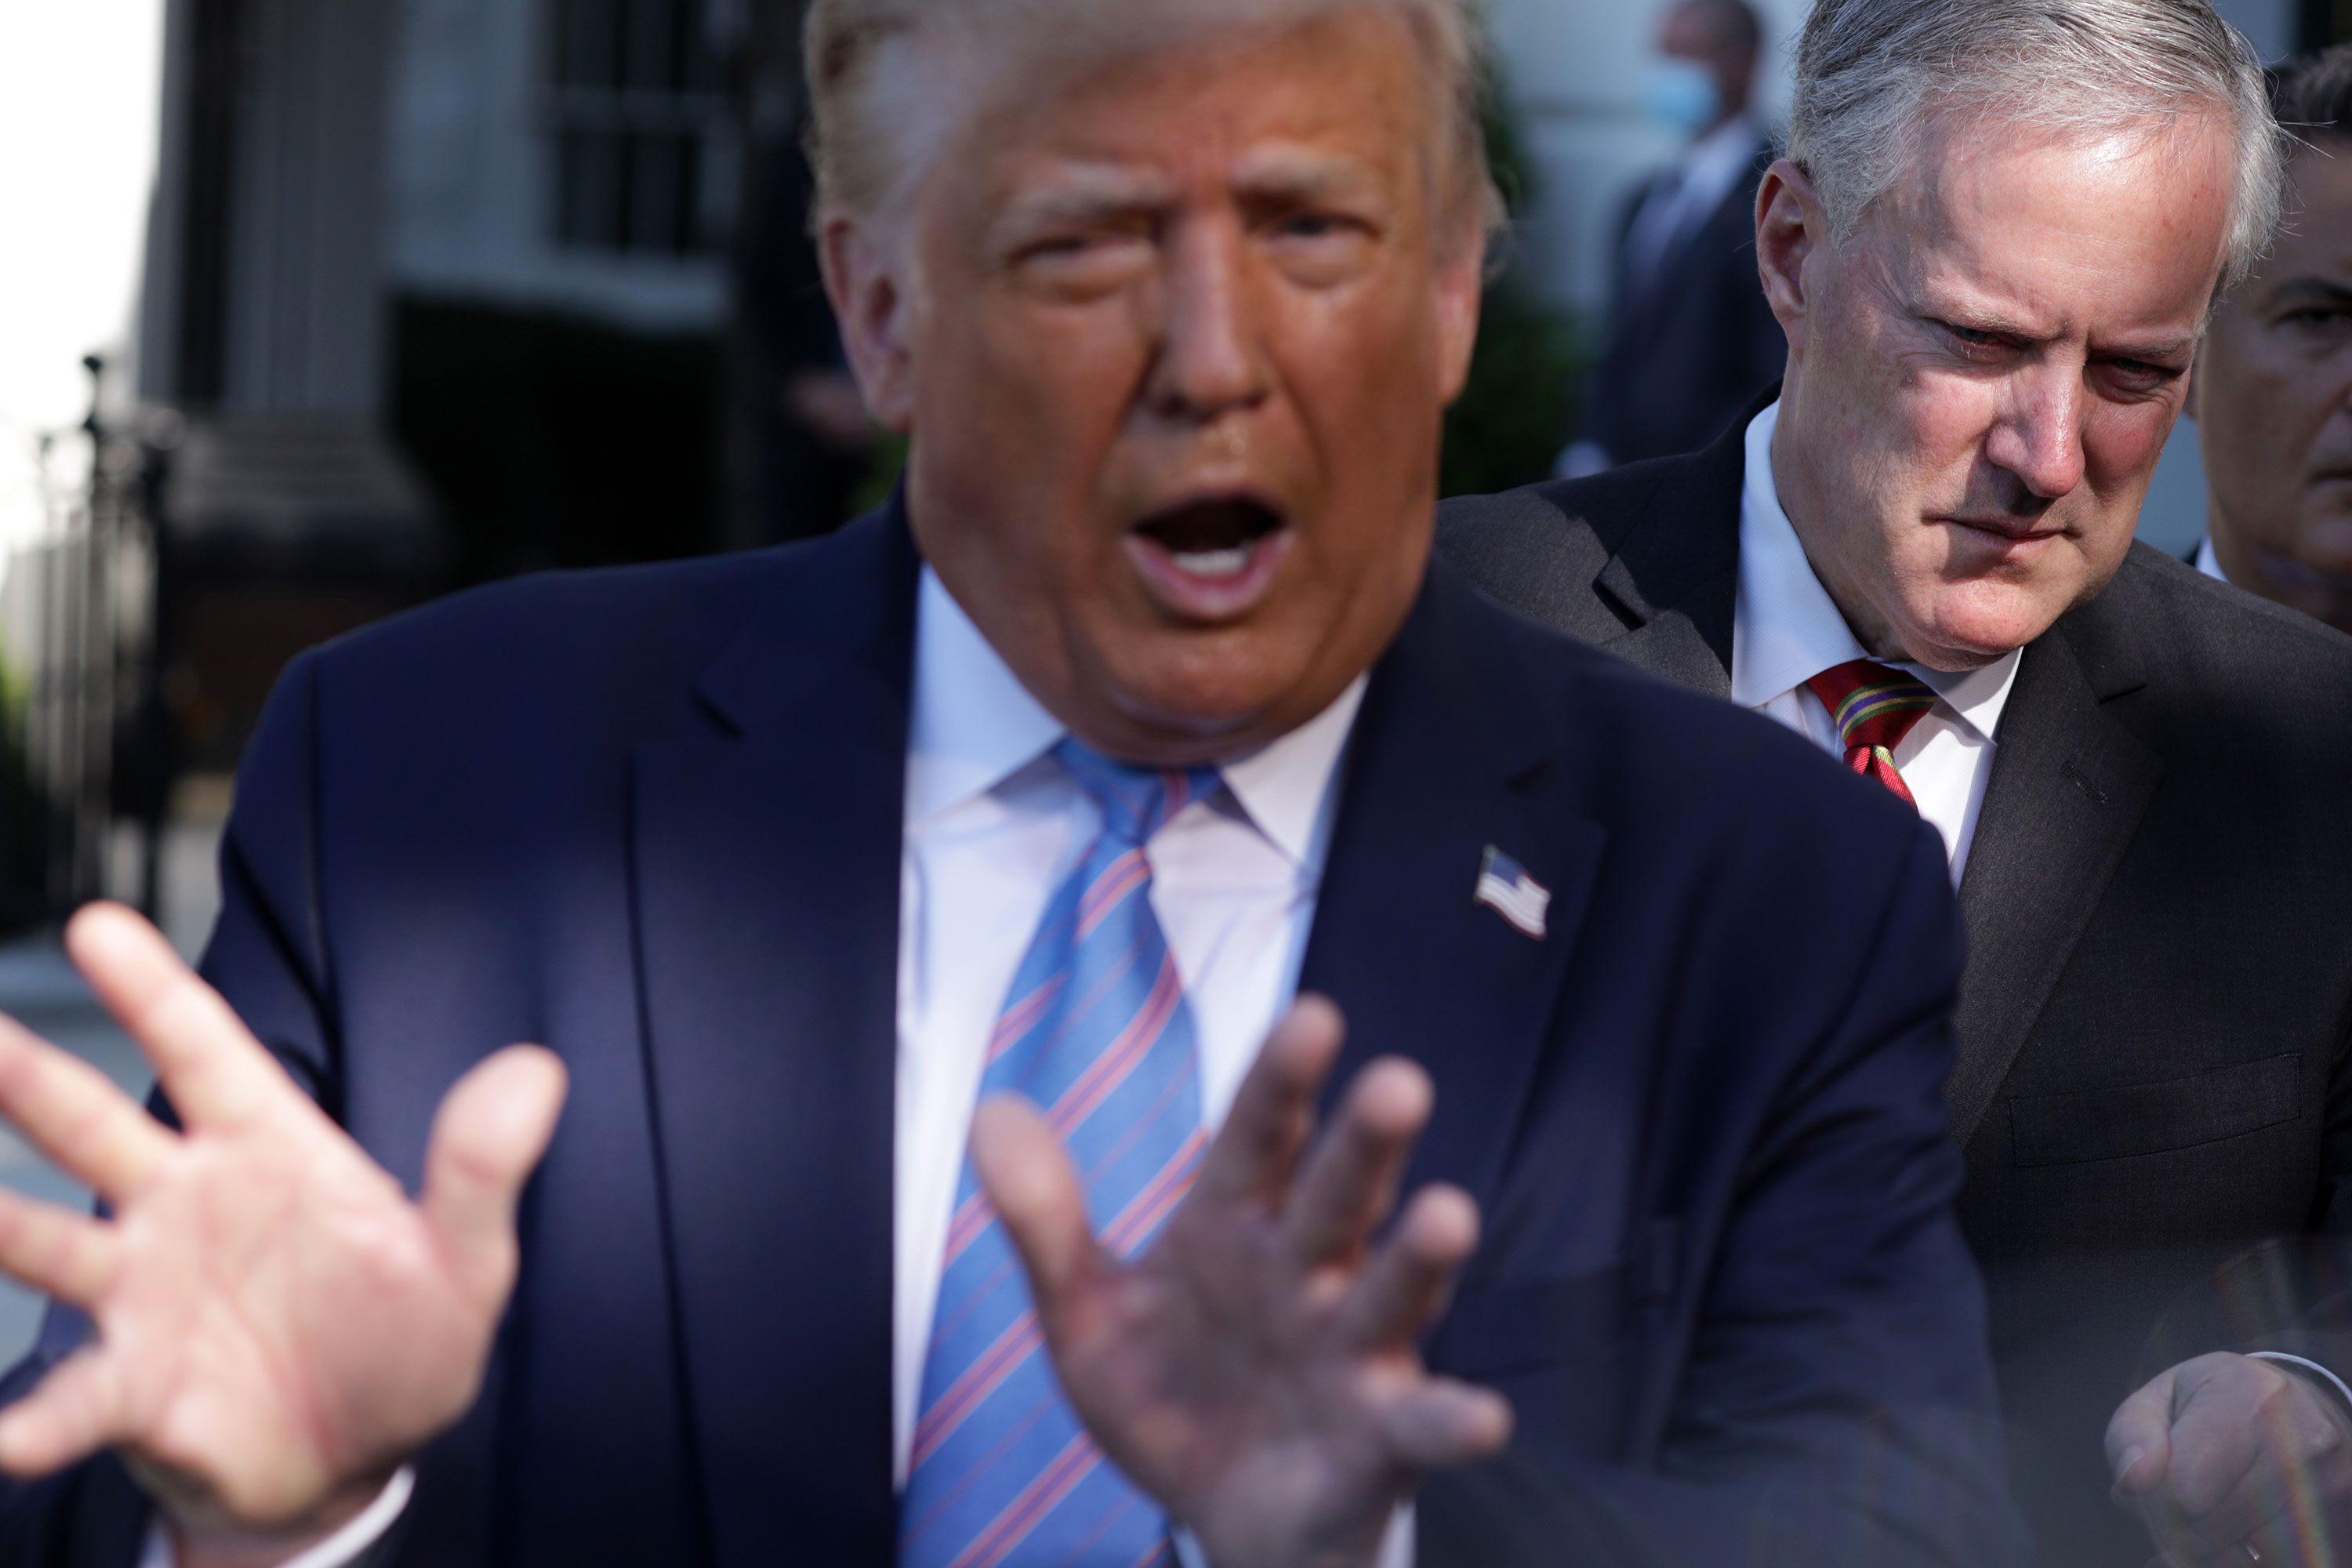 Former White House chief of staff Mark Meadows listens as former President Donald Trump speaks on the South Lawn of the White House in July 2020.